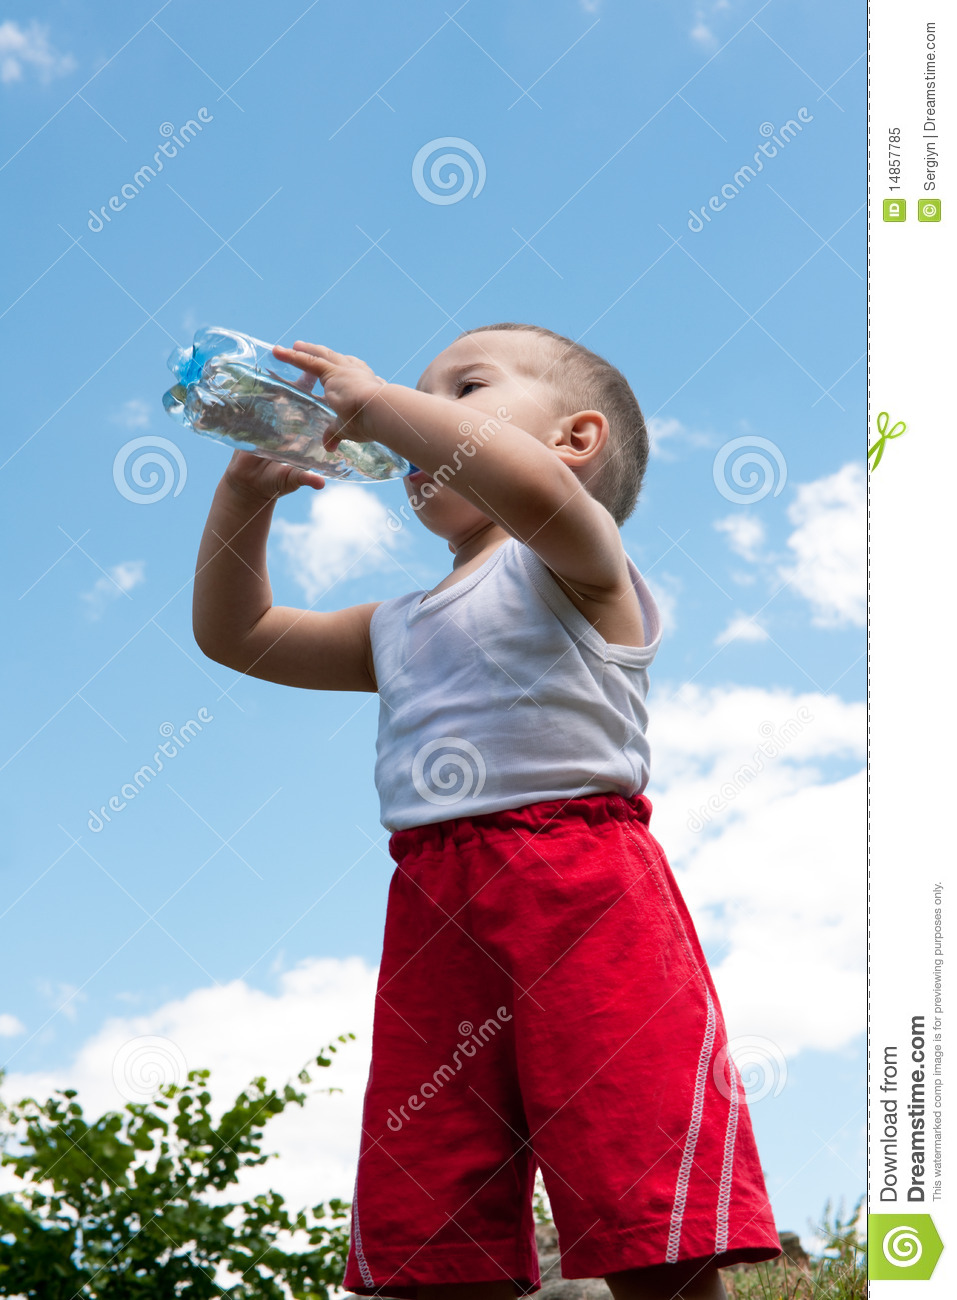 Drinking Water Little Boy Royalty Free Stock Photo   Image  14857785